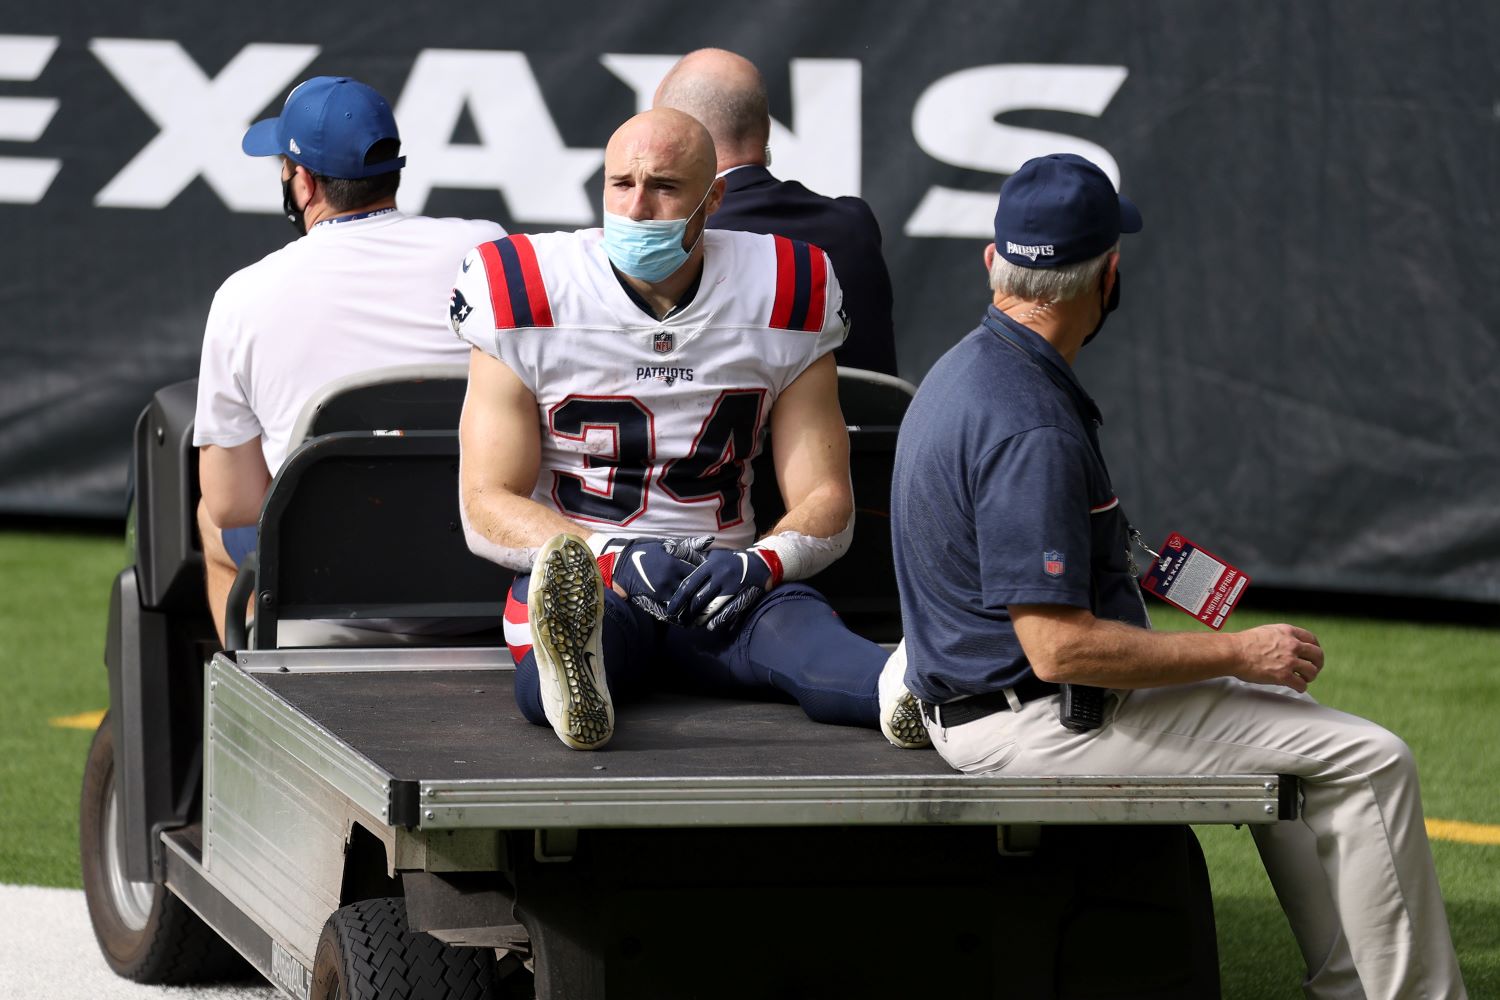 After suffering a season-ending knee injury in a contract year, Rex Burkhead appears to have played his final snap with the Patriots.